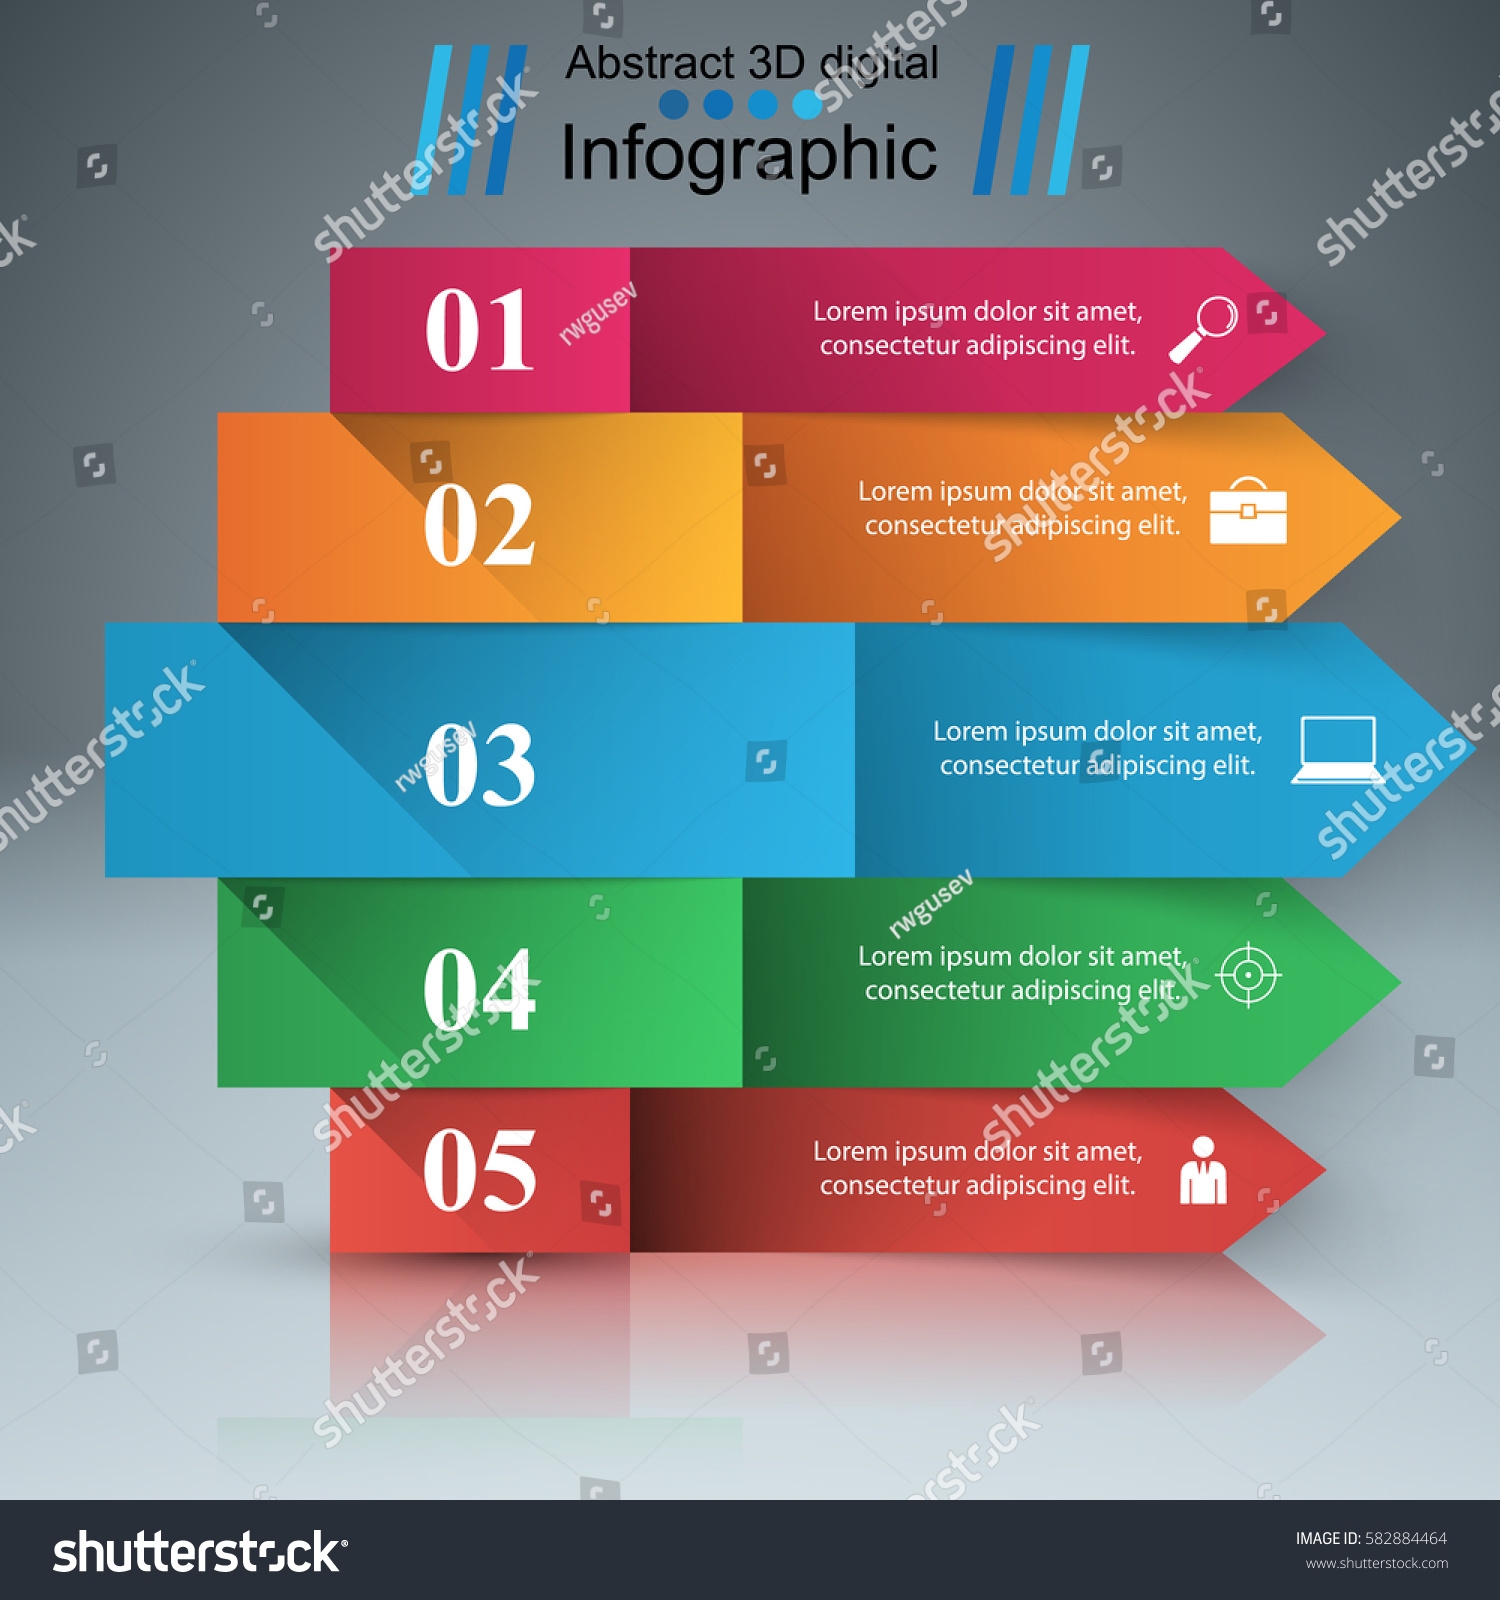 3d Infographic Design Template And Marketing Royalty Free Stock Vector 582884464 8547